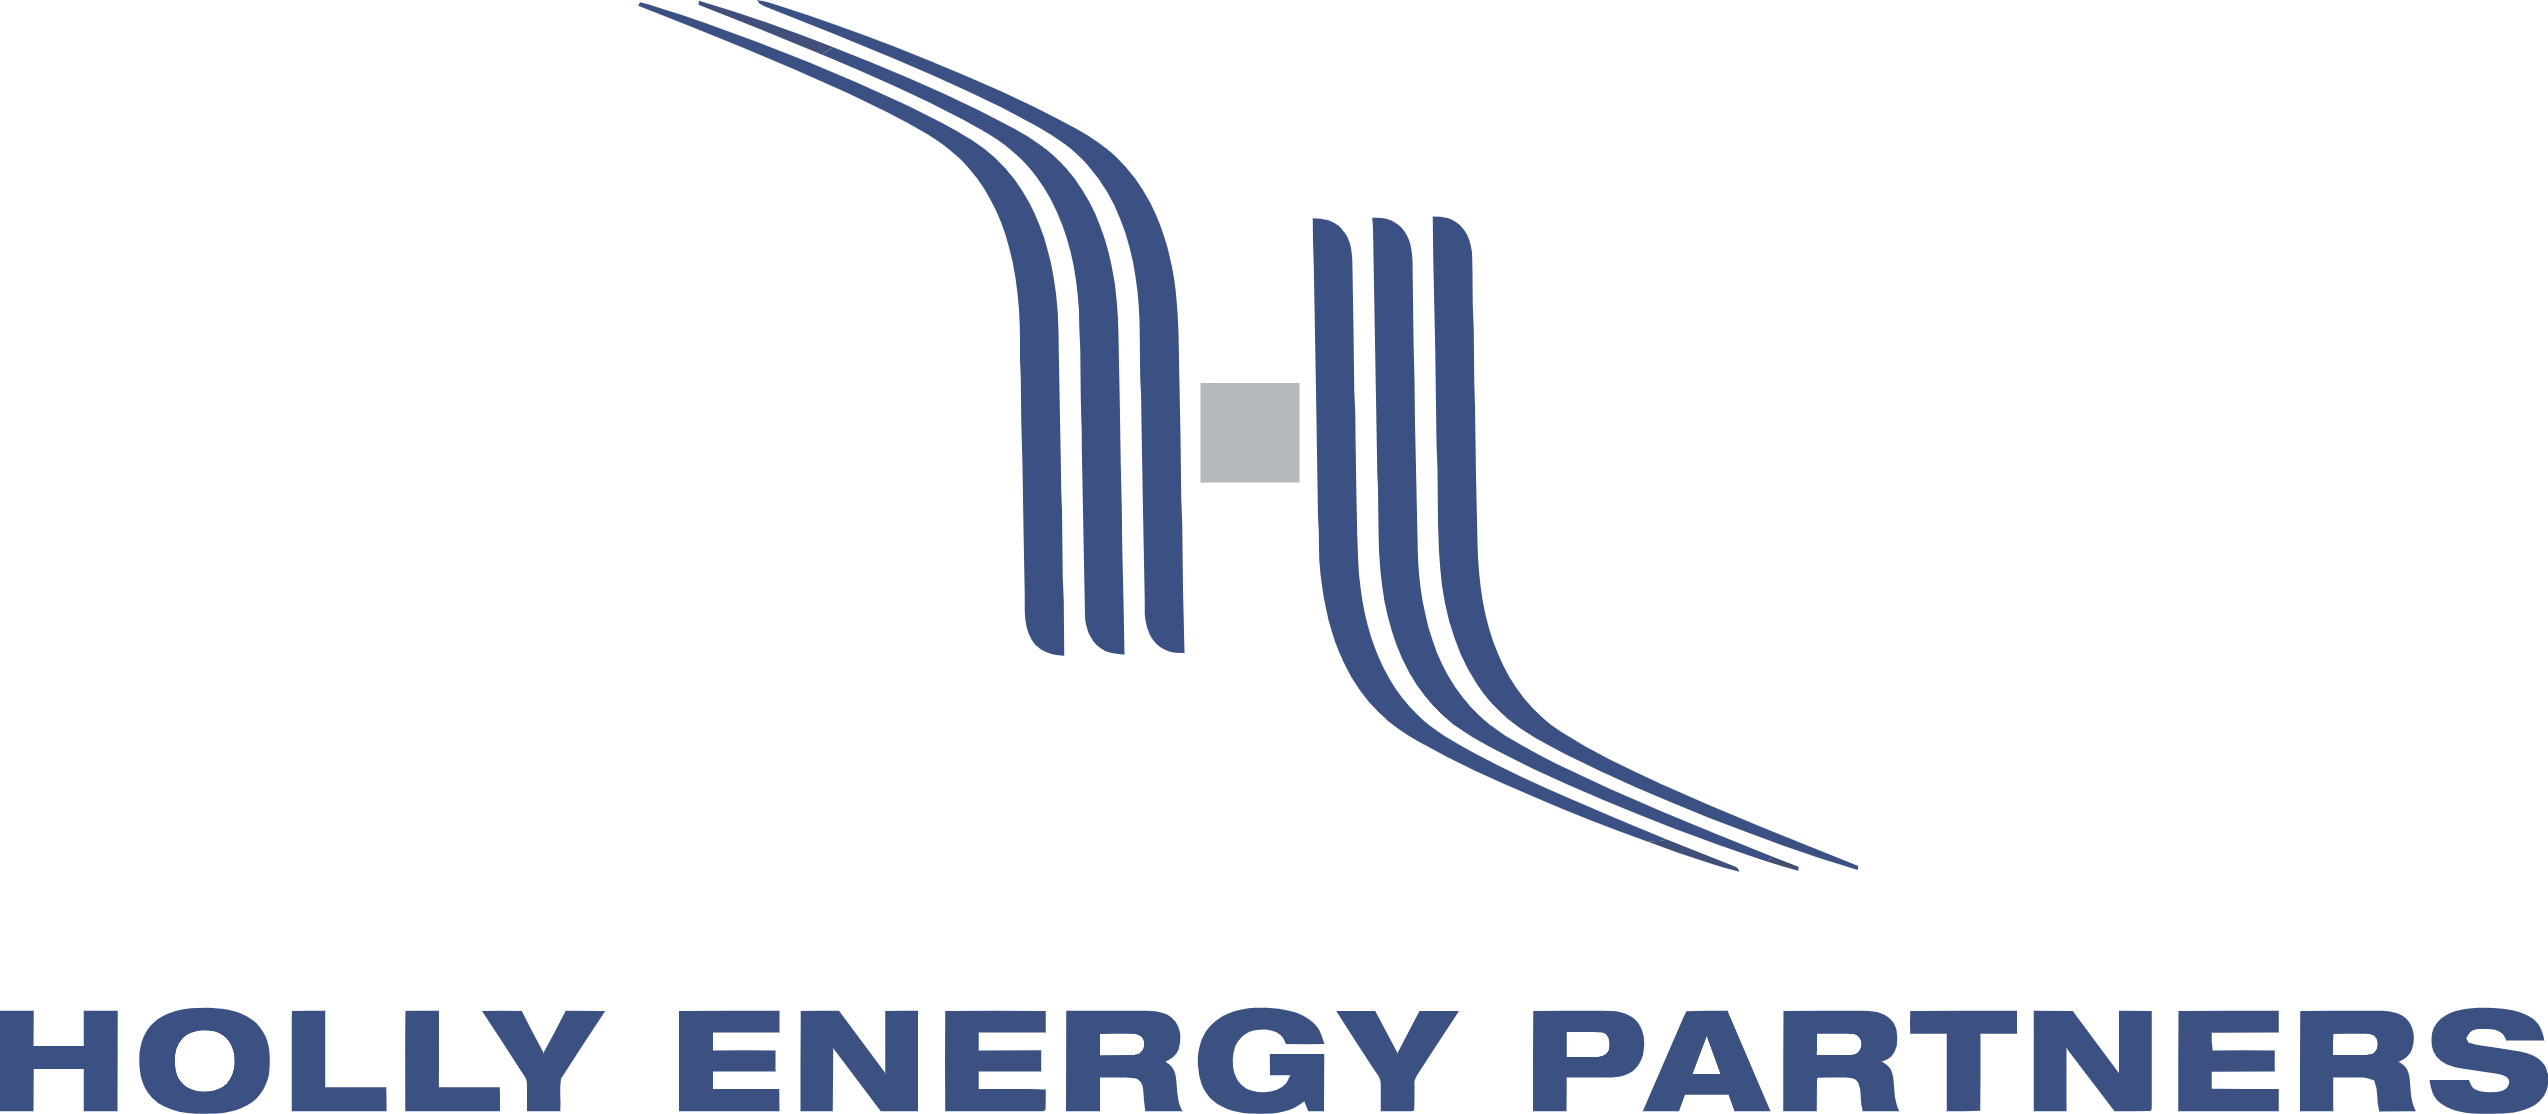 Holly Energy Partners logo large (transparent PNG)